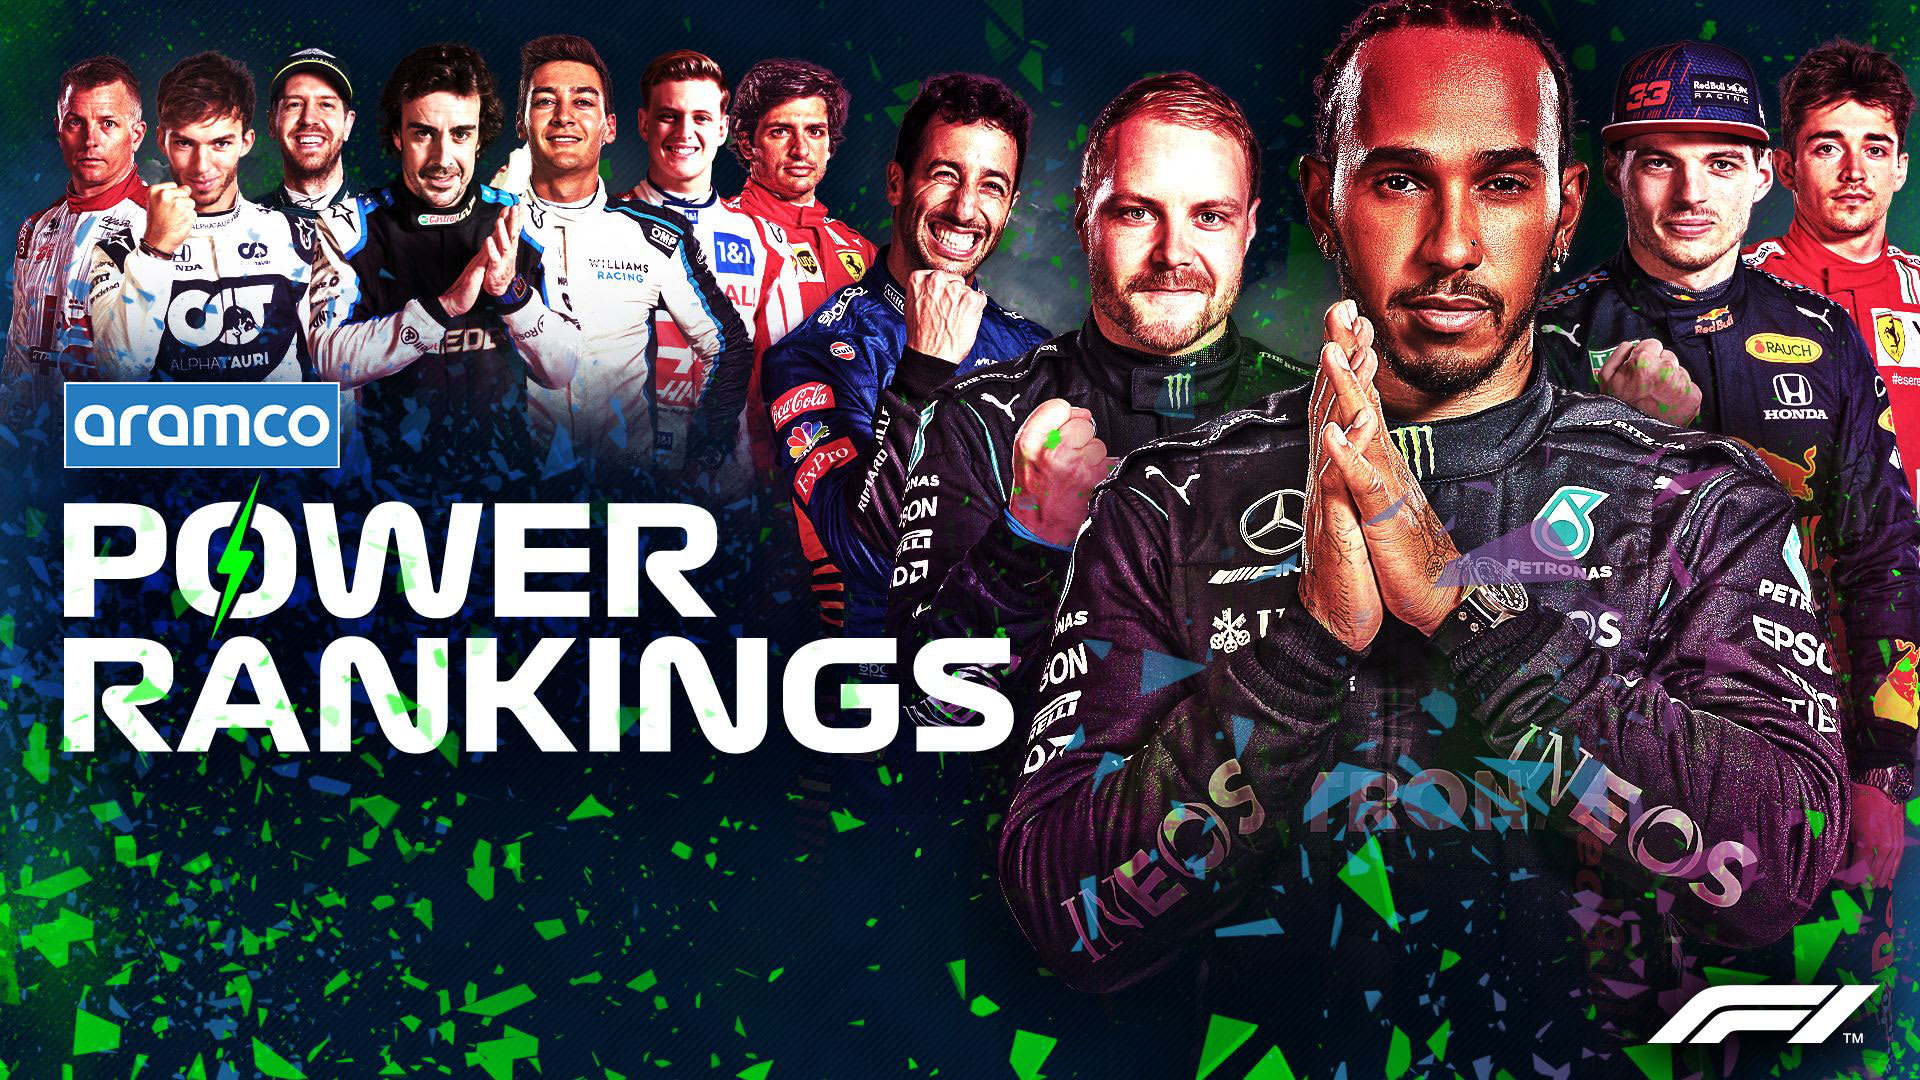 F1 POWER RANKINGS Which driver finished top of the charts after the 2021 Abu Dhabi Grand Prix? Formula 1®